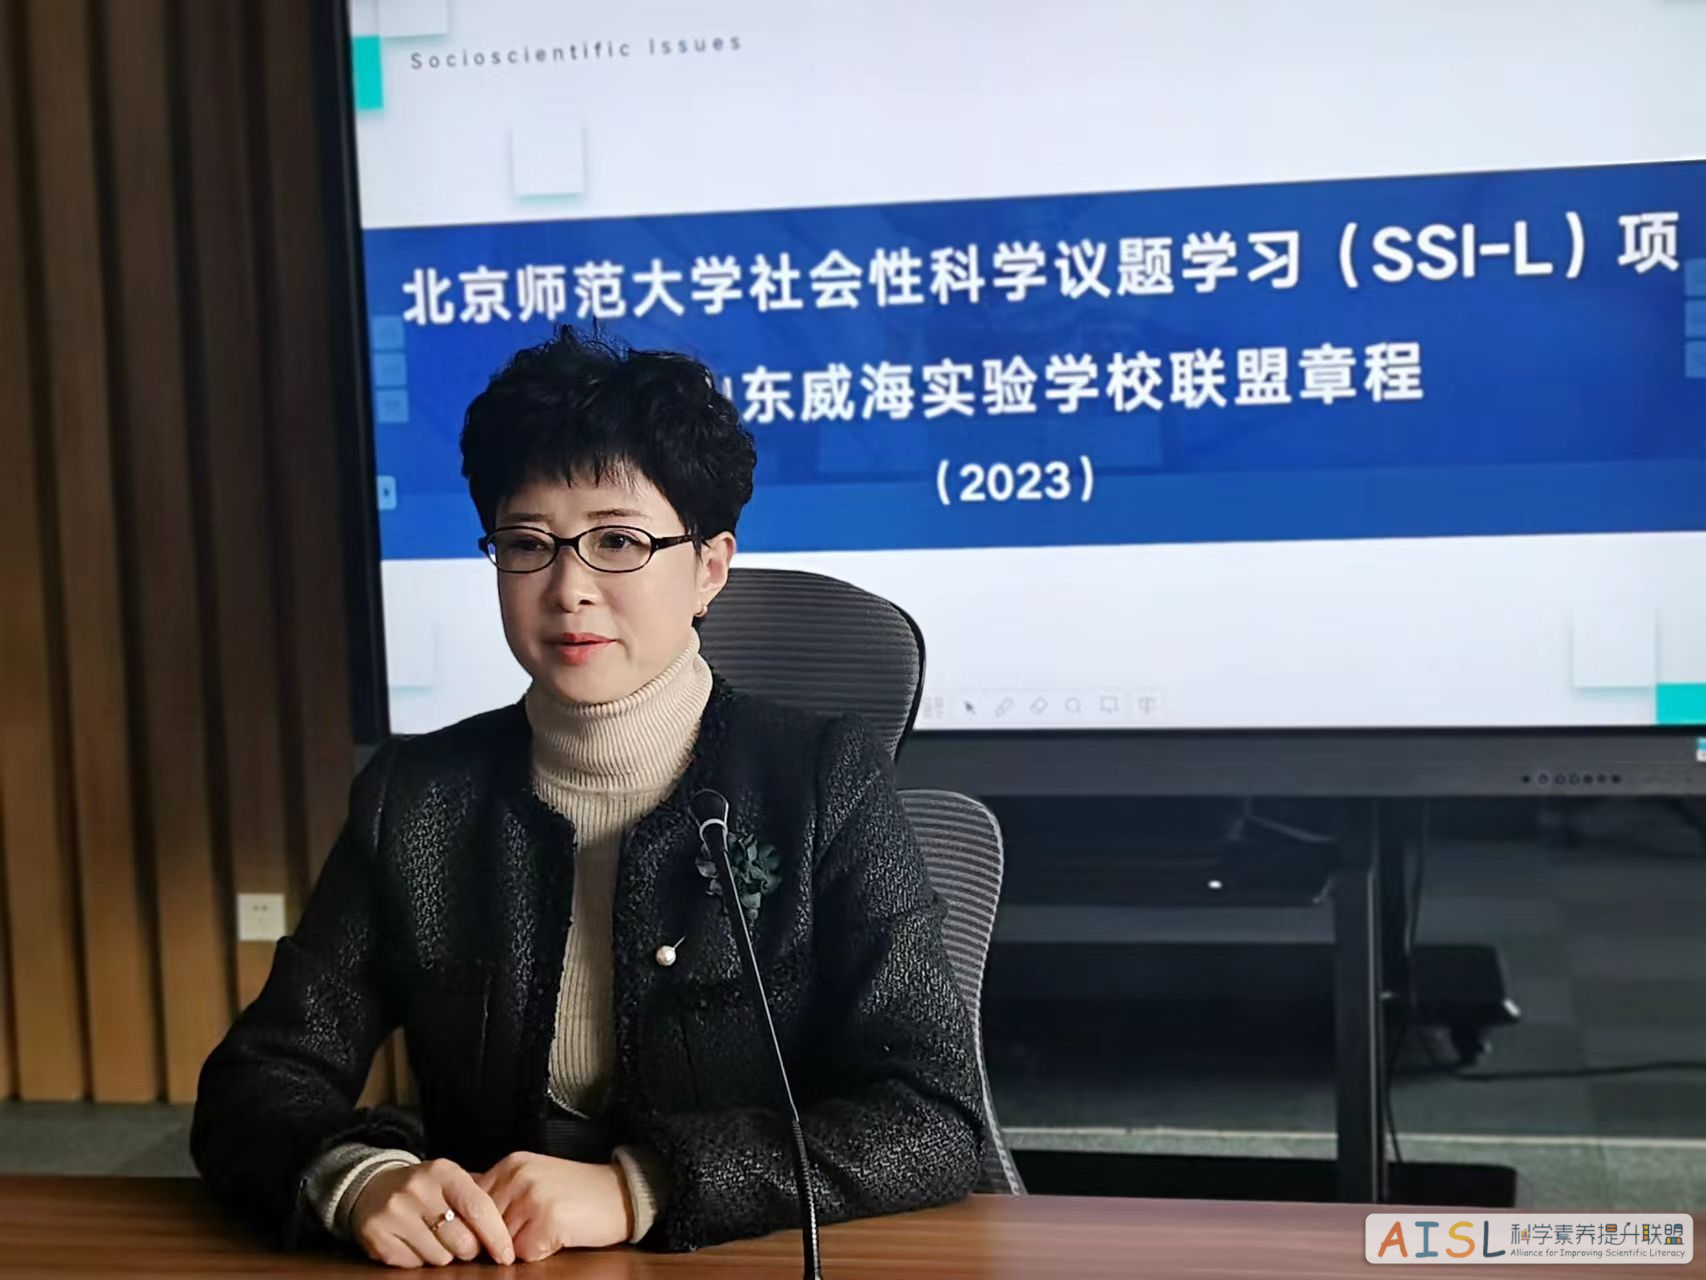 [SSI Learning] 山东省威海市社会性科学议题学习课题阶段性推进工作会议纪要<br>Minutes of the Phased Work Promotion Conference of SSI-L Project in Weihai, Shandong Province插图4